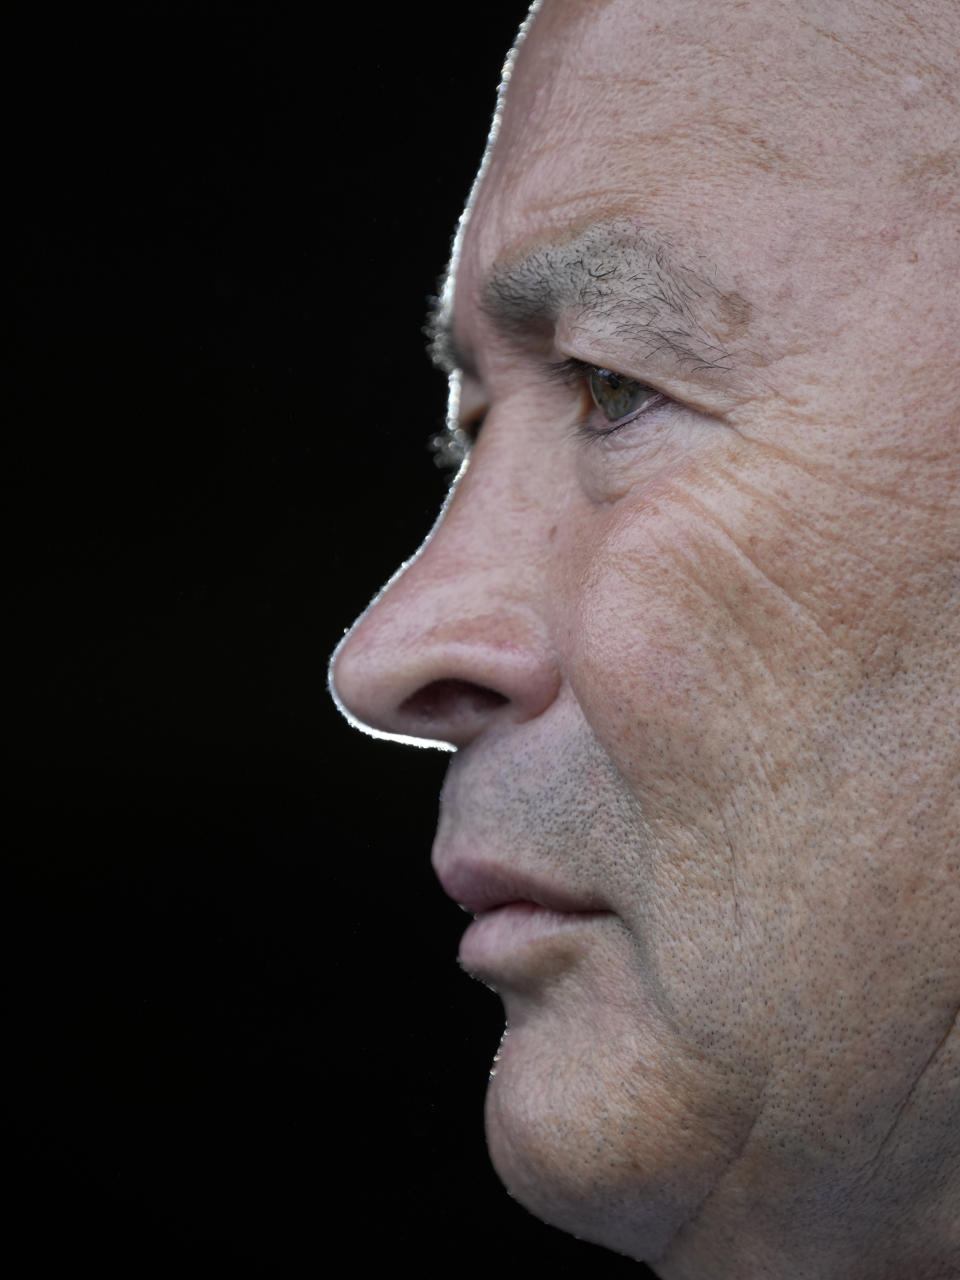 Australian Rugby's head coach Eddie Jones speaks to media in Sydney, Tuesday, Oct. 17, 2023. Wallabies head coach, Jones, says he is "committed to Australia" amid numerous reports that he is planning to quit and take up the Japan coaching job for a second time. (AP Photo/Rick Rycroft)